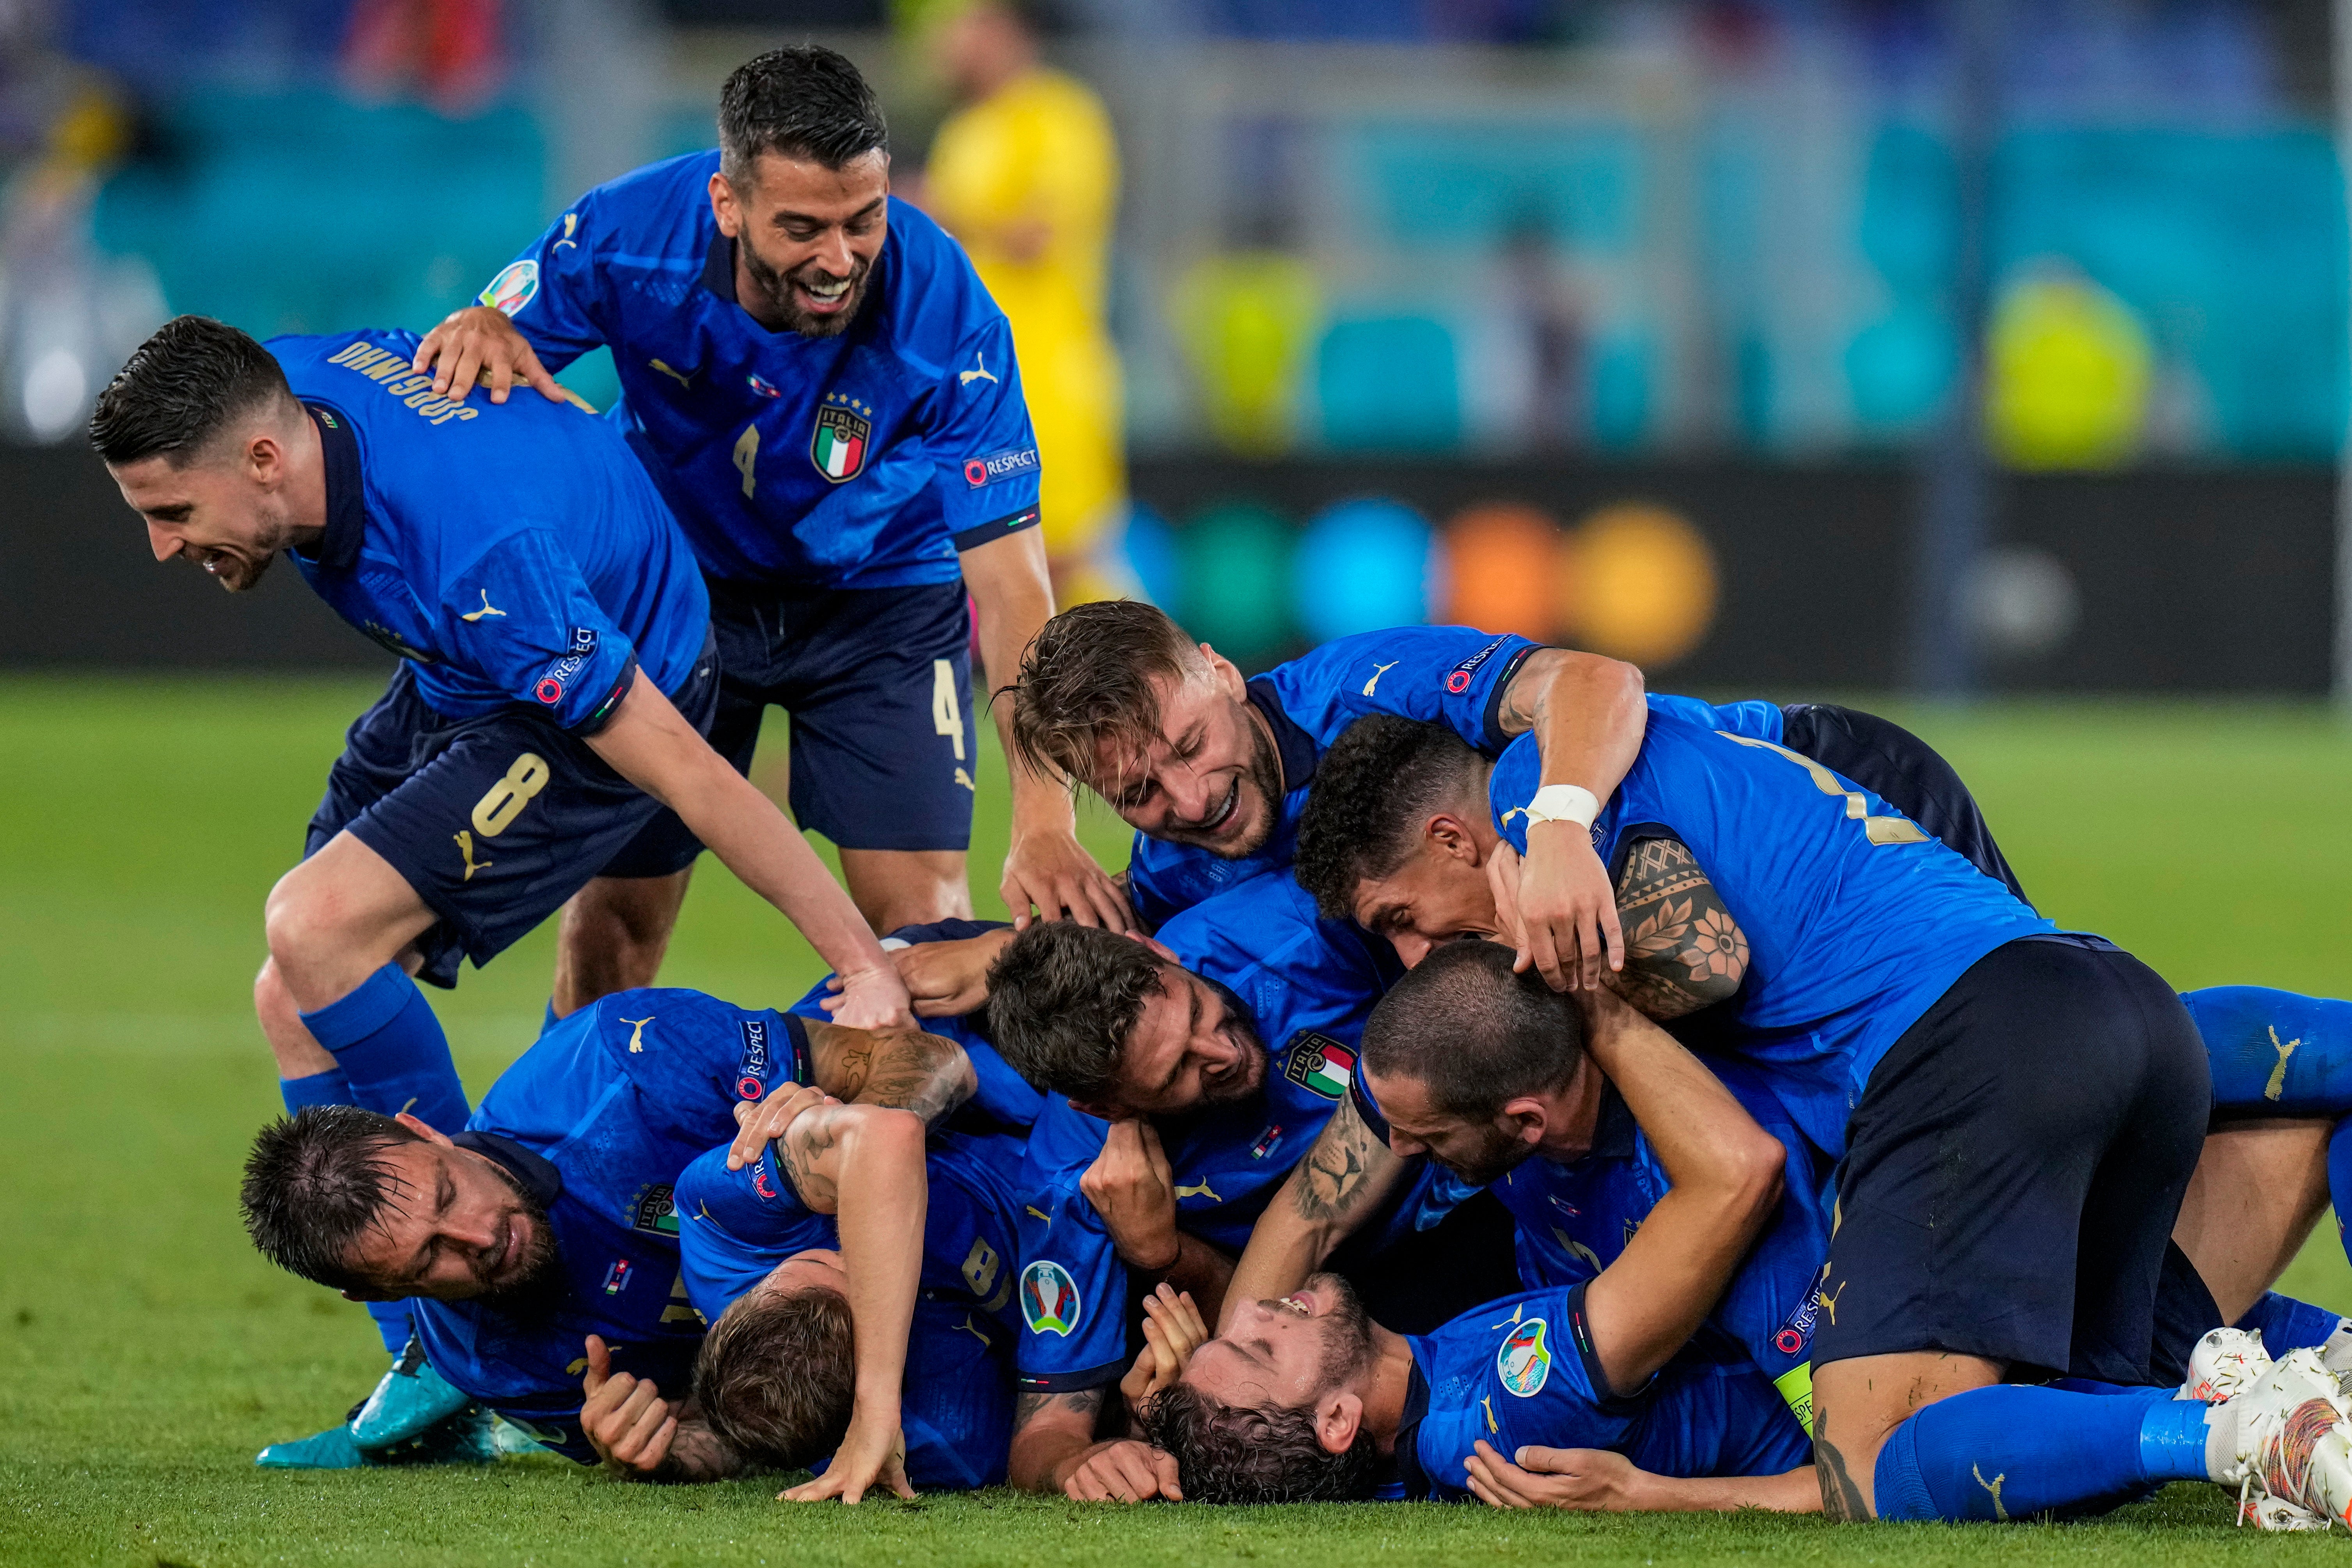 Italy are looking the real deal as they booked their place in the last 16 of Euro 2020 with a 2-0 win over Switzerland